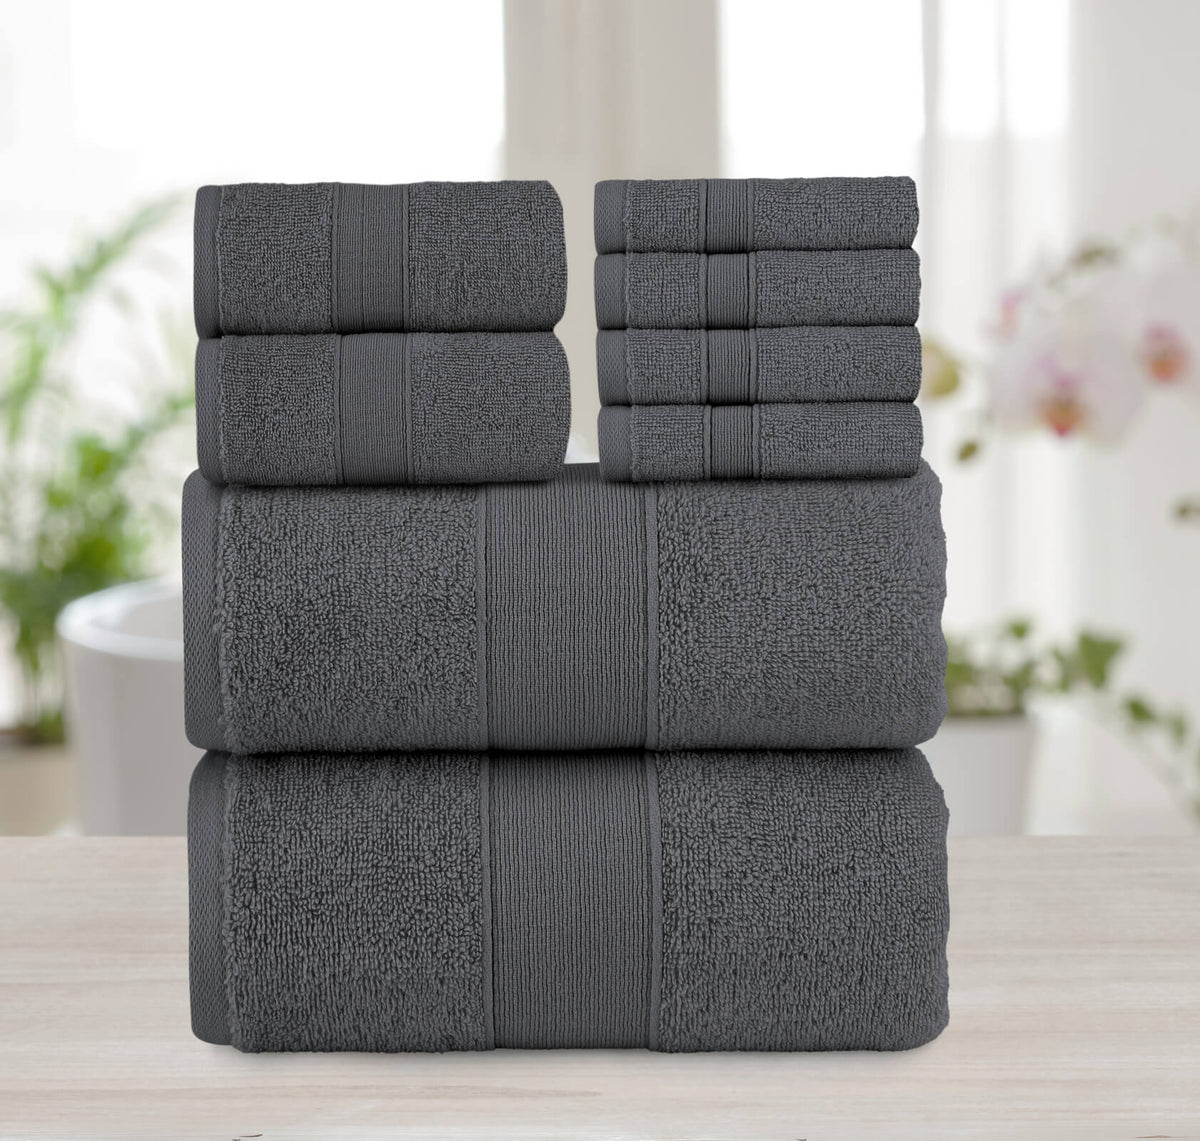 Chic Home Dobby Border Turkish Cotton 8 Piece Towel Set-Charcoal